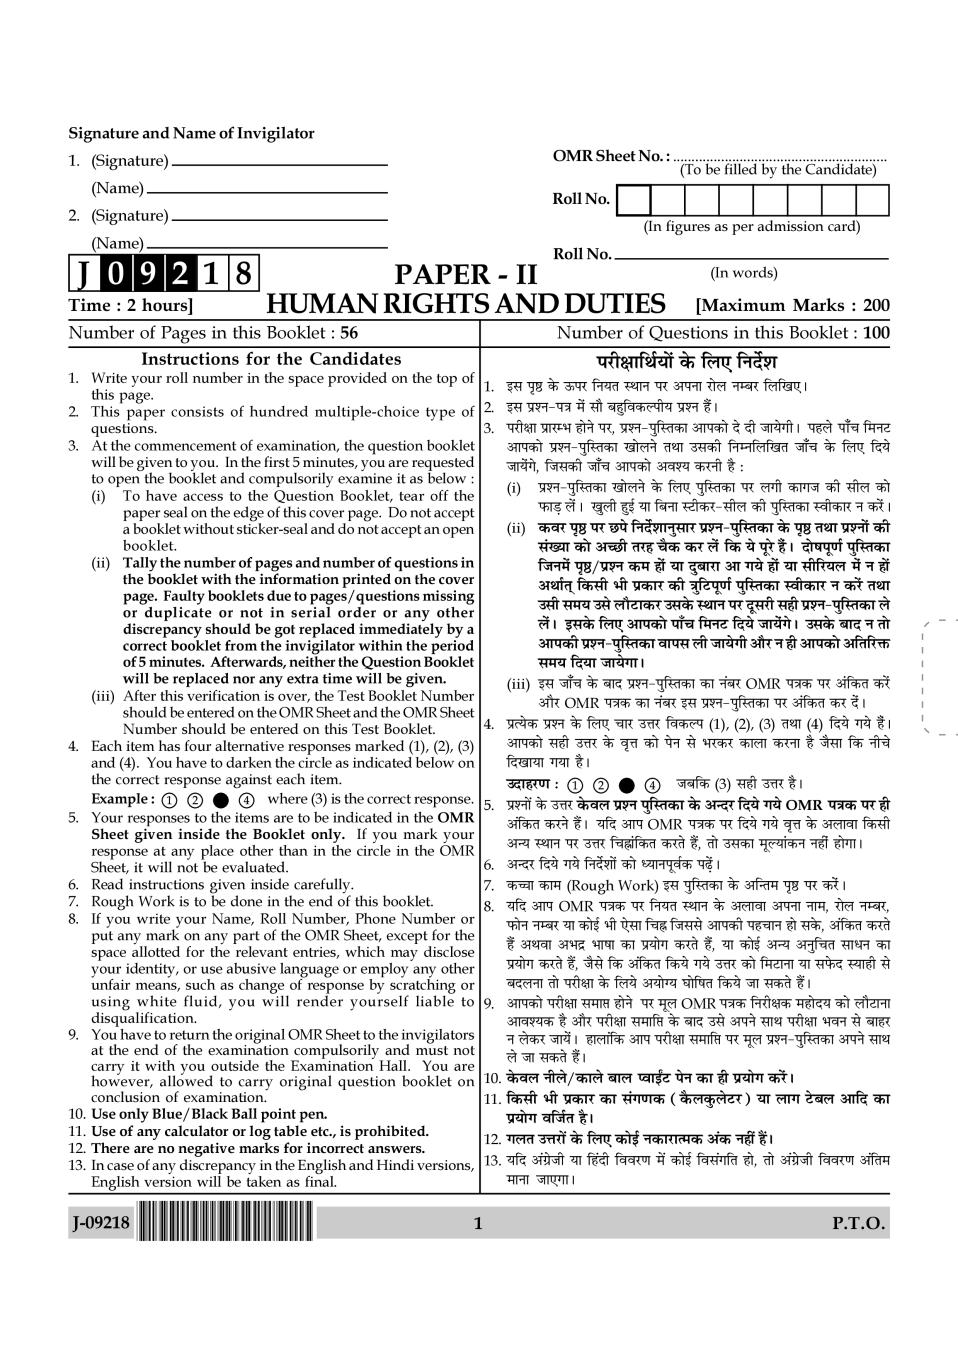 UGC NET Human Rights and Duties Question Paper 2018 - Page 1